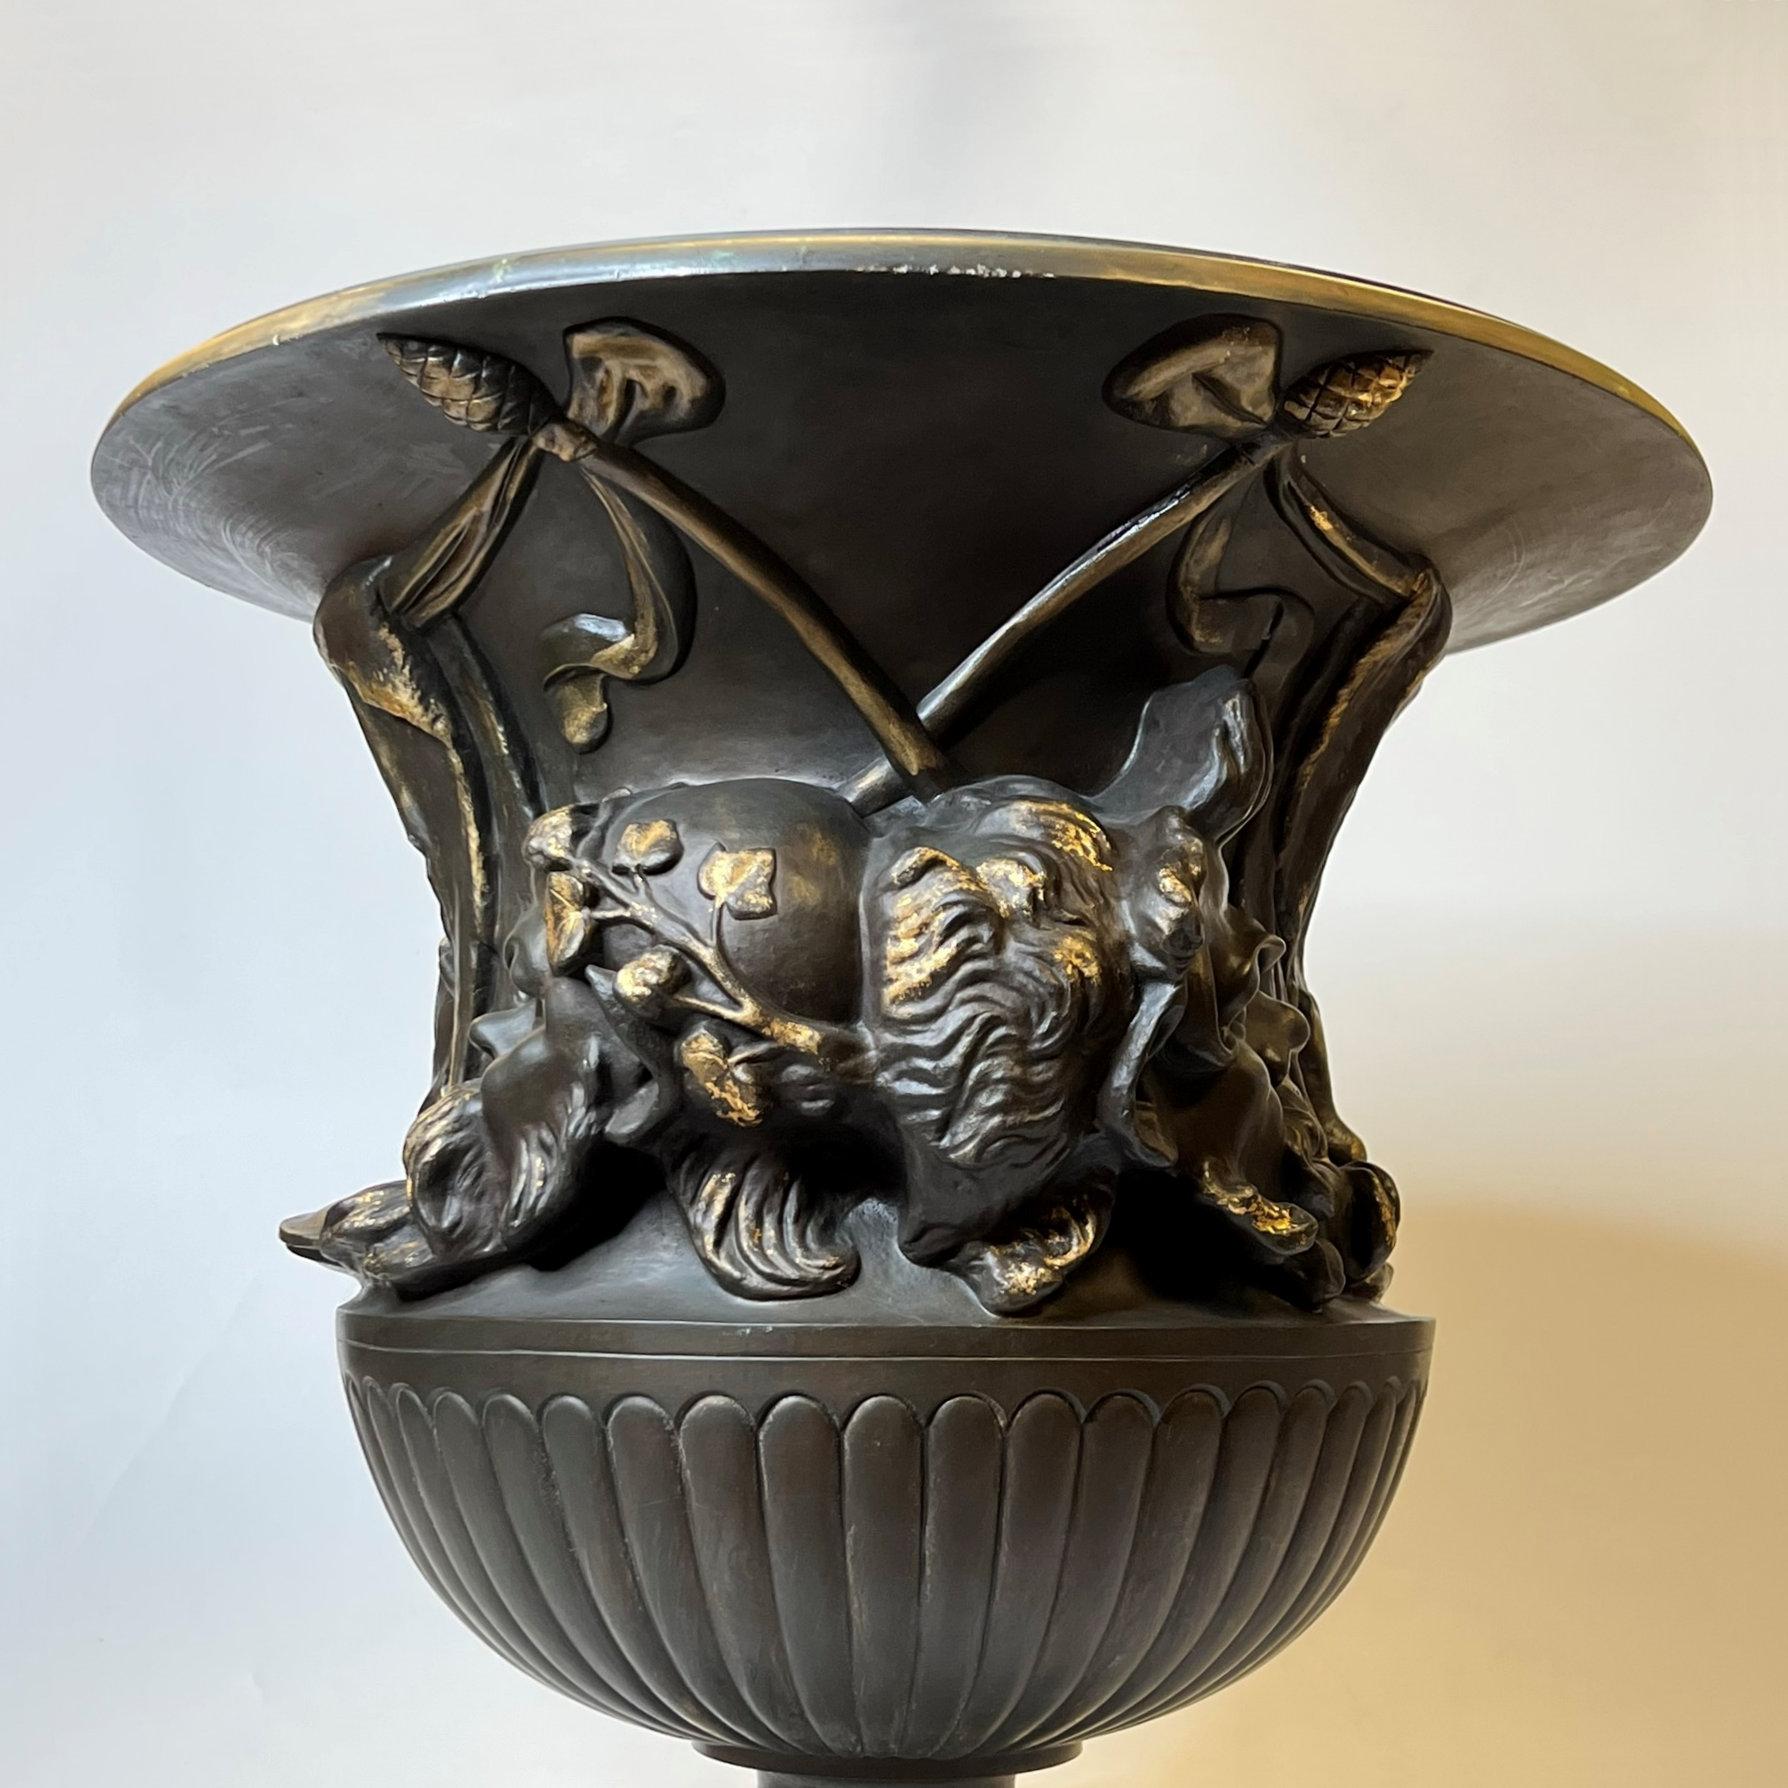 Large 19th Century French Bronze Borghese Vase Cast by Barbedienne For Sale 5